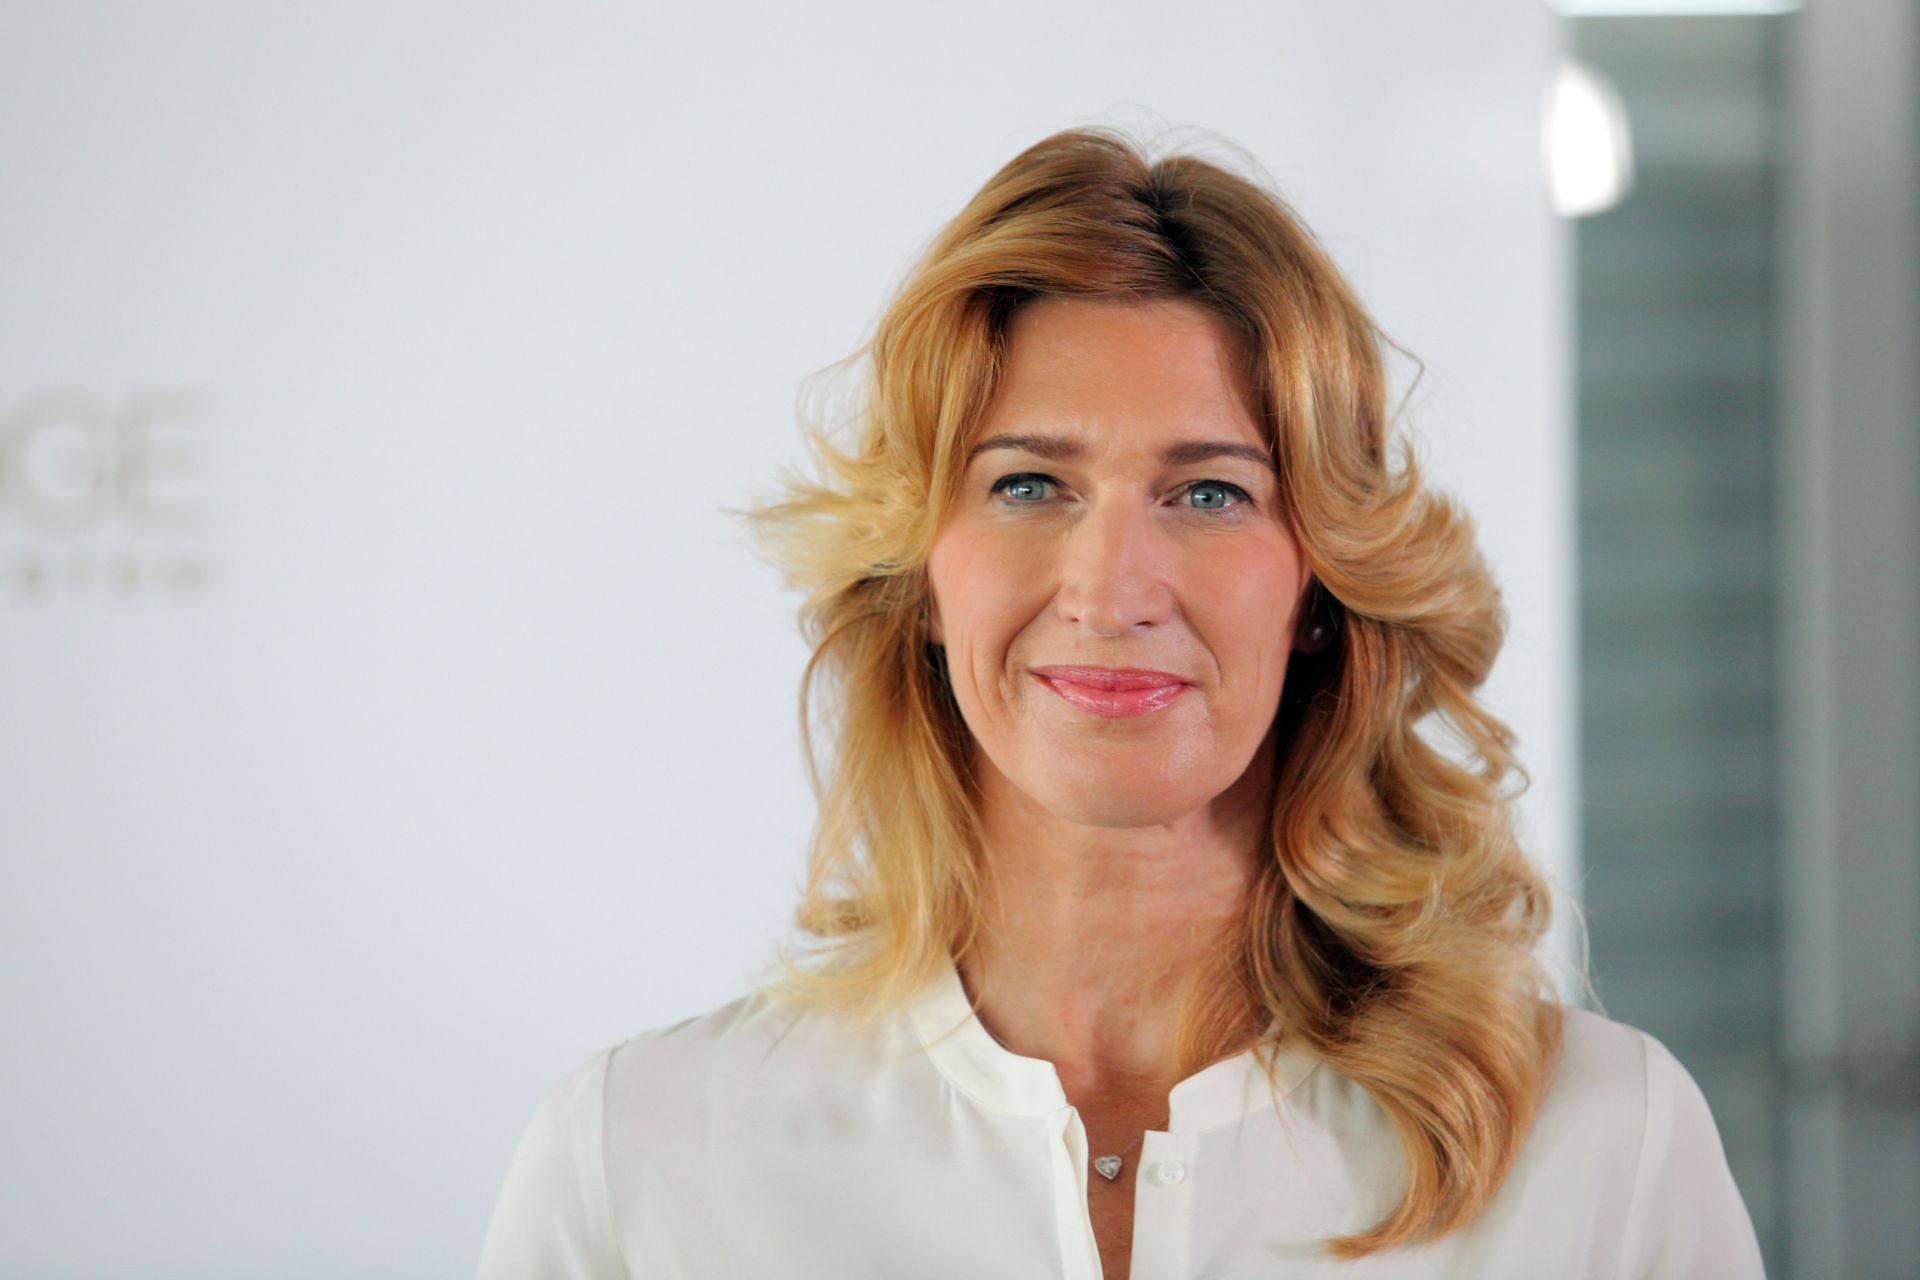 Steffi Graf at a product launch event at Hamburg in 2014